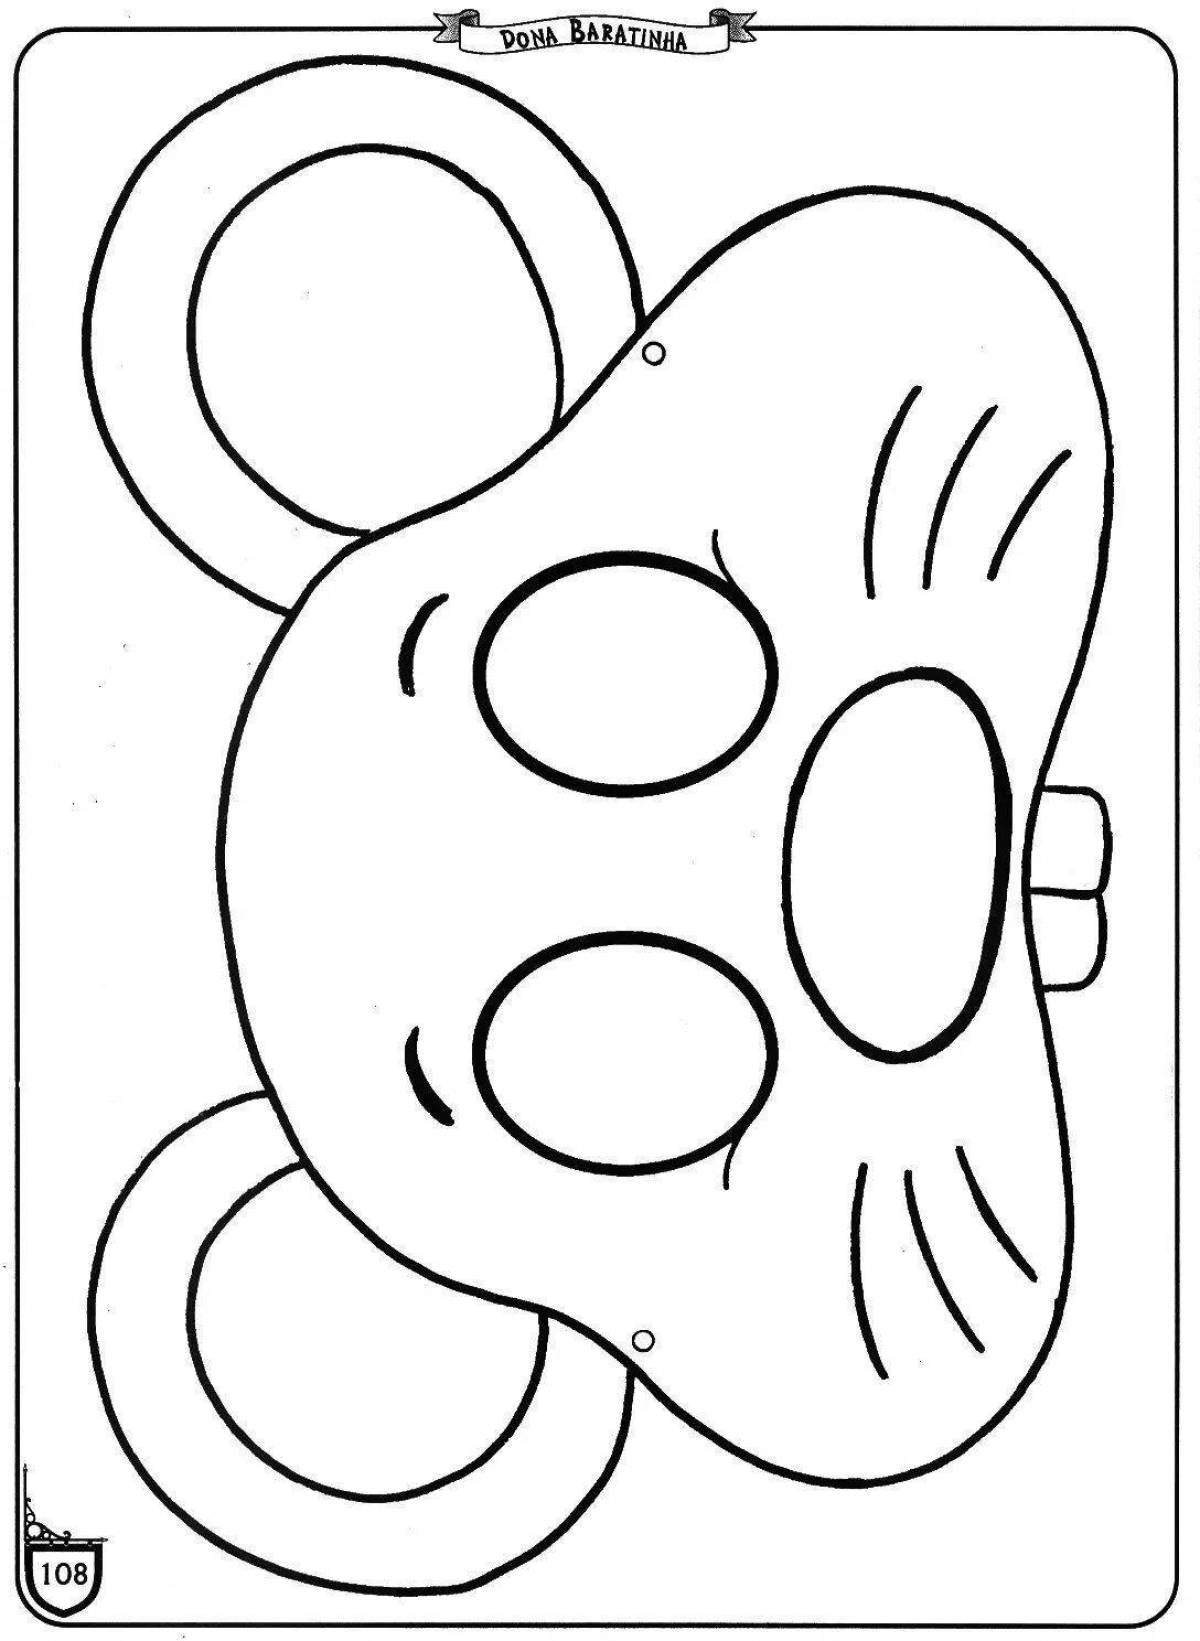 Fun mouse head coloring page